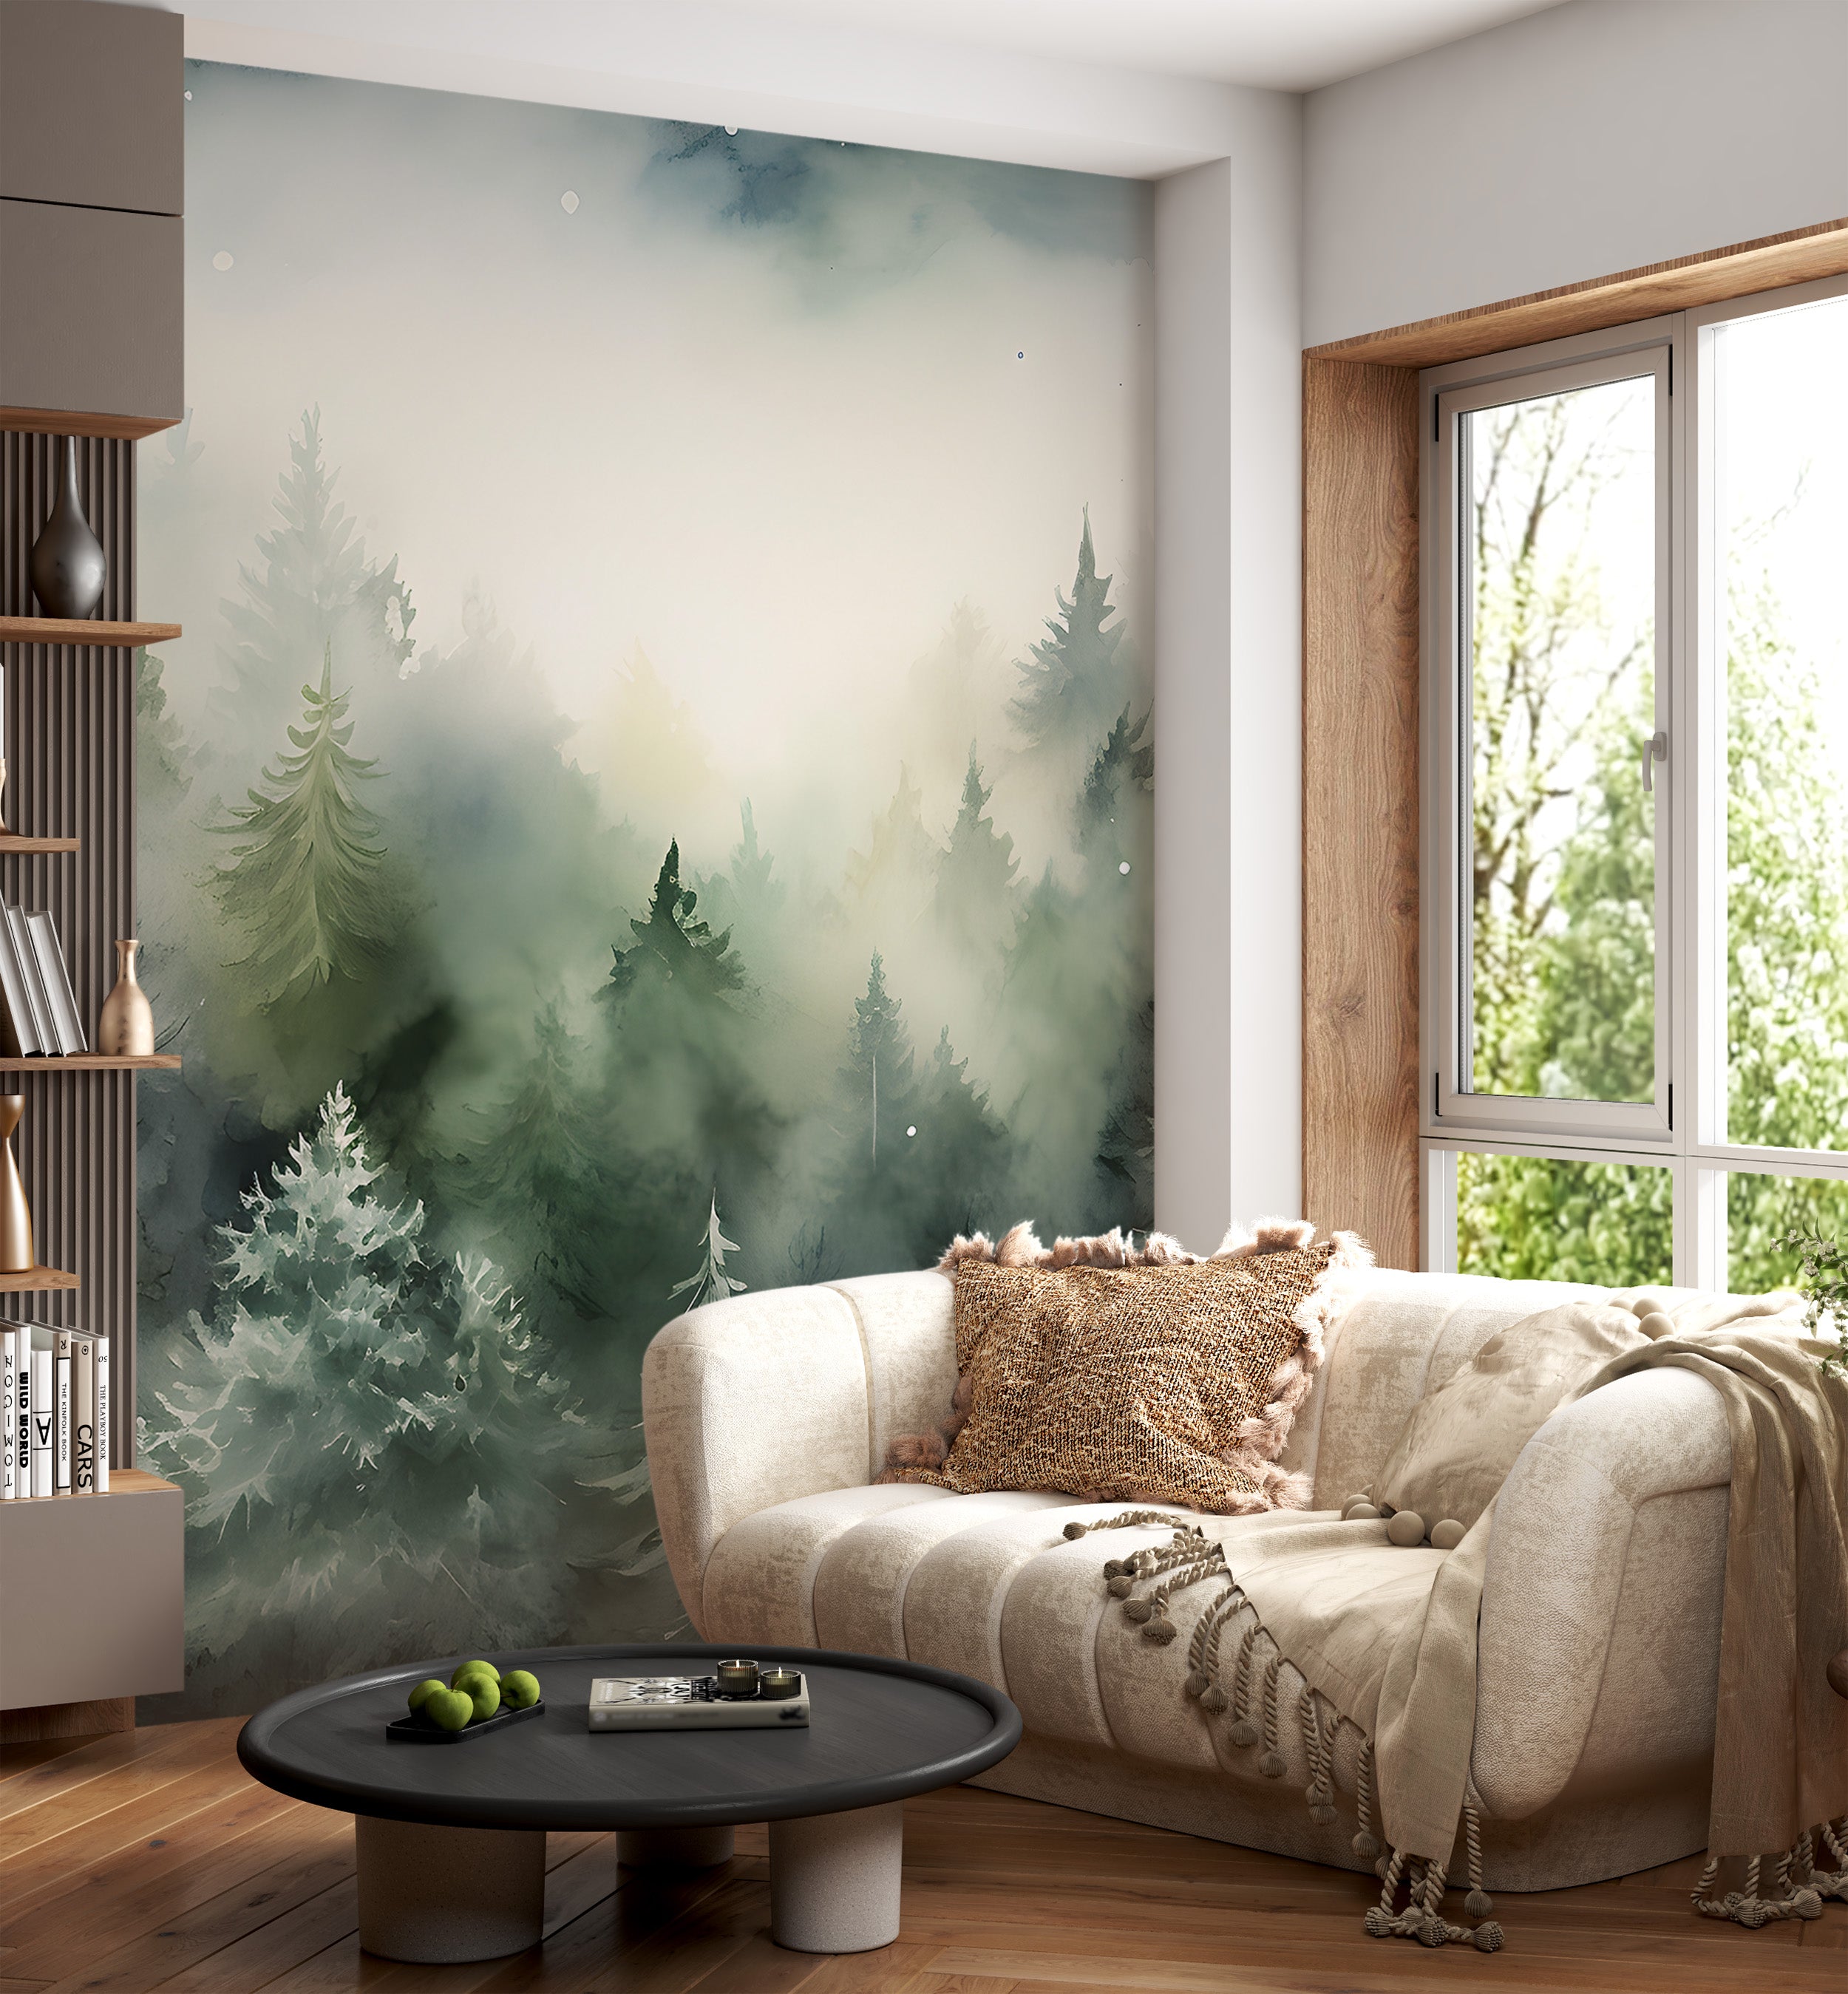 Nature-Inspired Decor for a Relaxing Ambiance